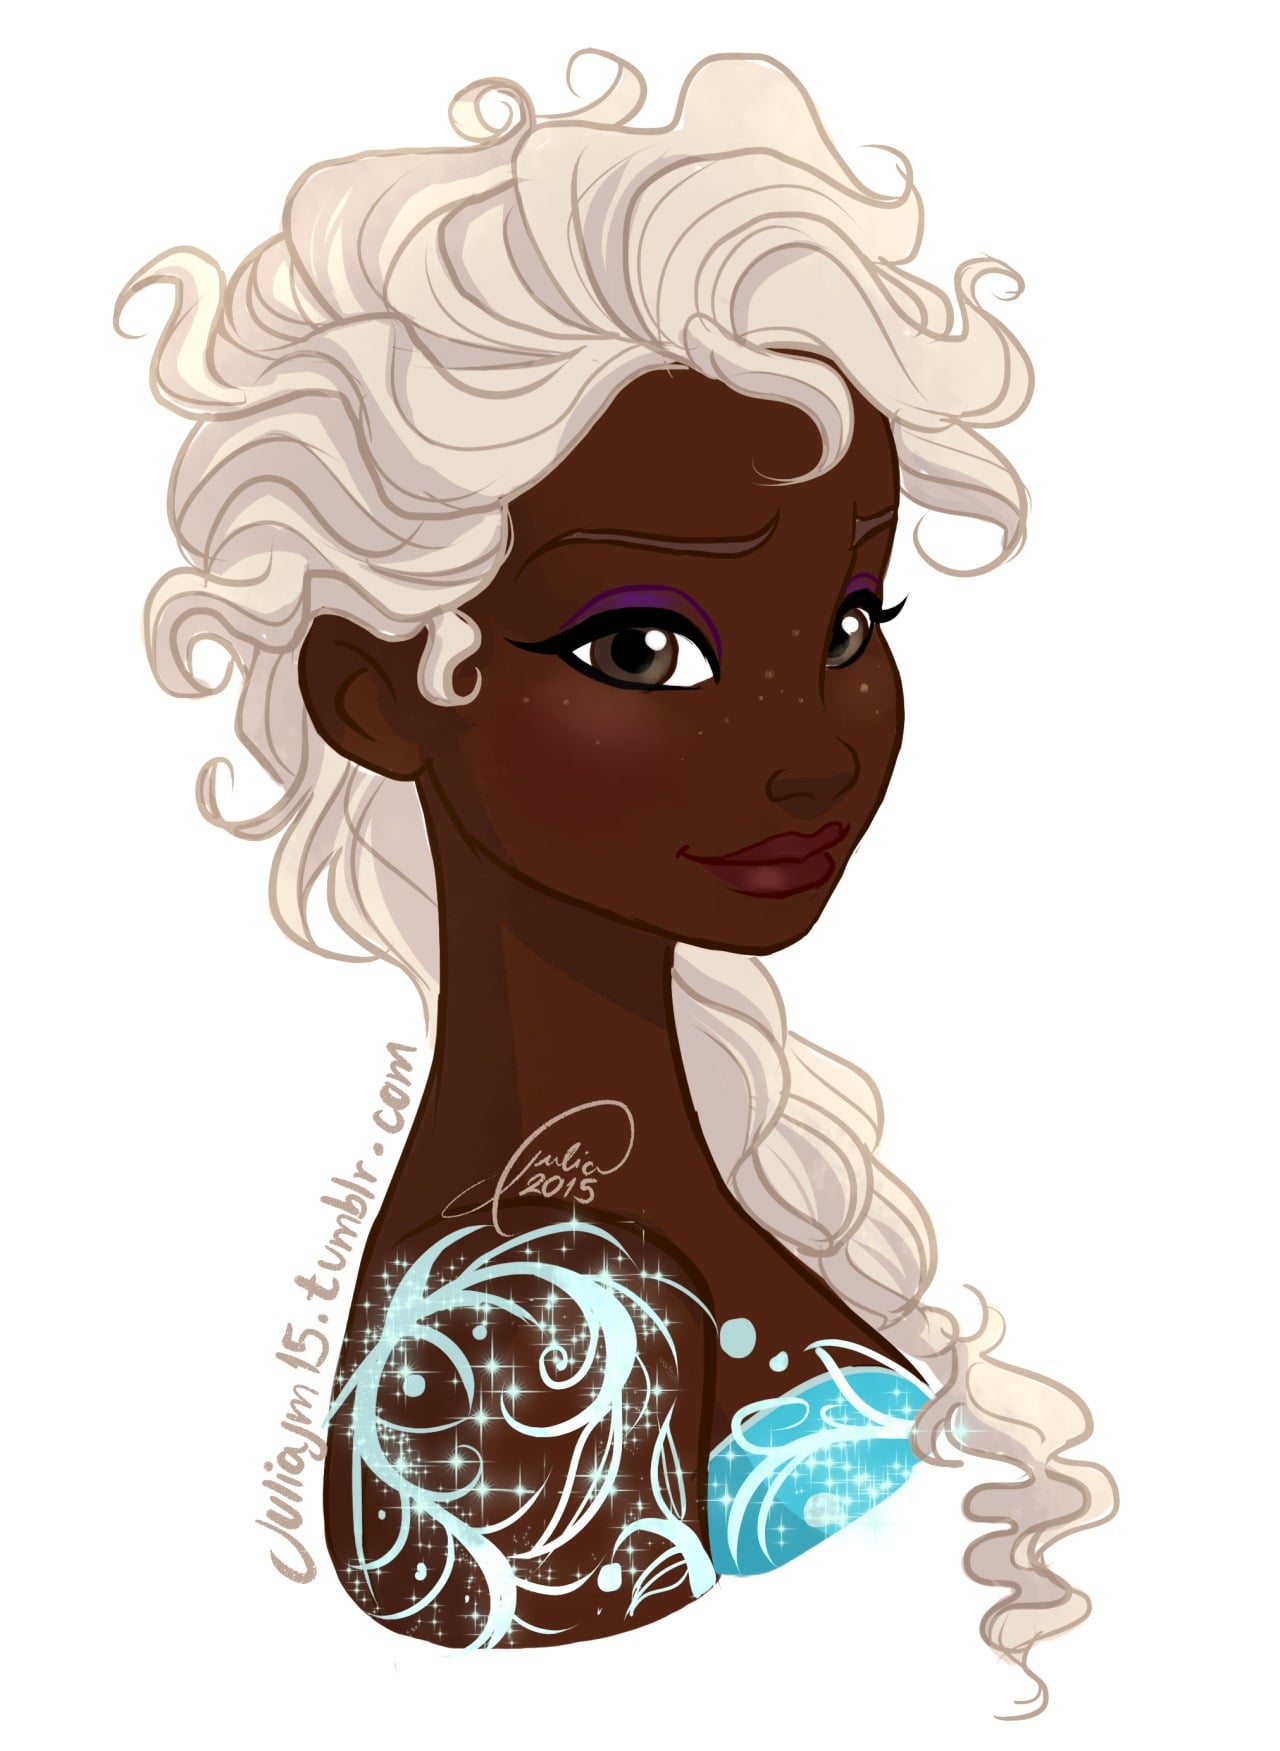 Black Elsa With Blond Hair This Artist Created Beautiful